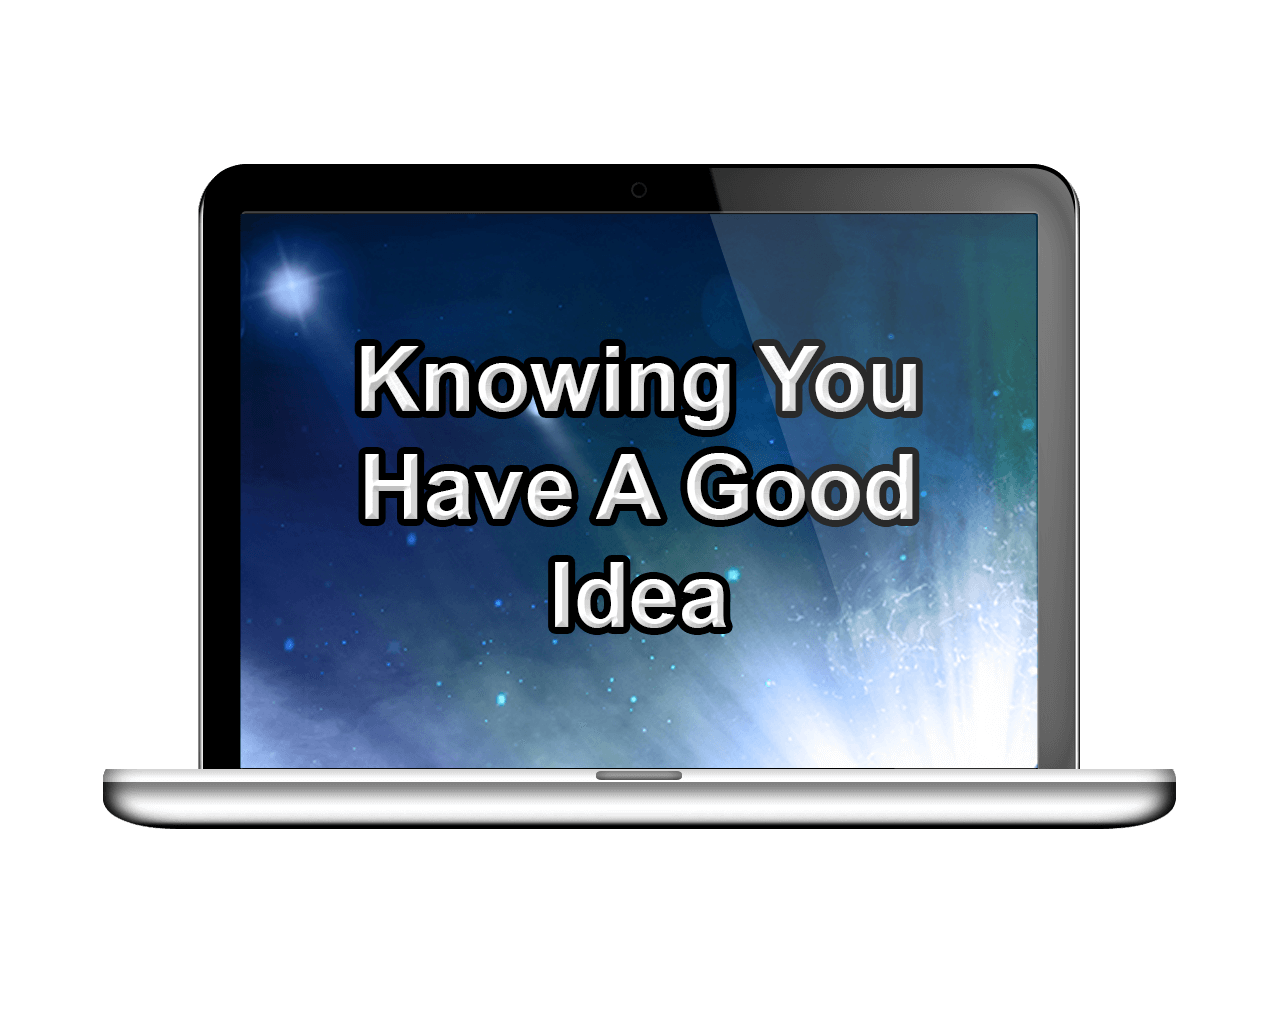 Knowing You Have A Good Idea Image